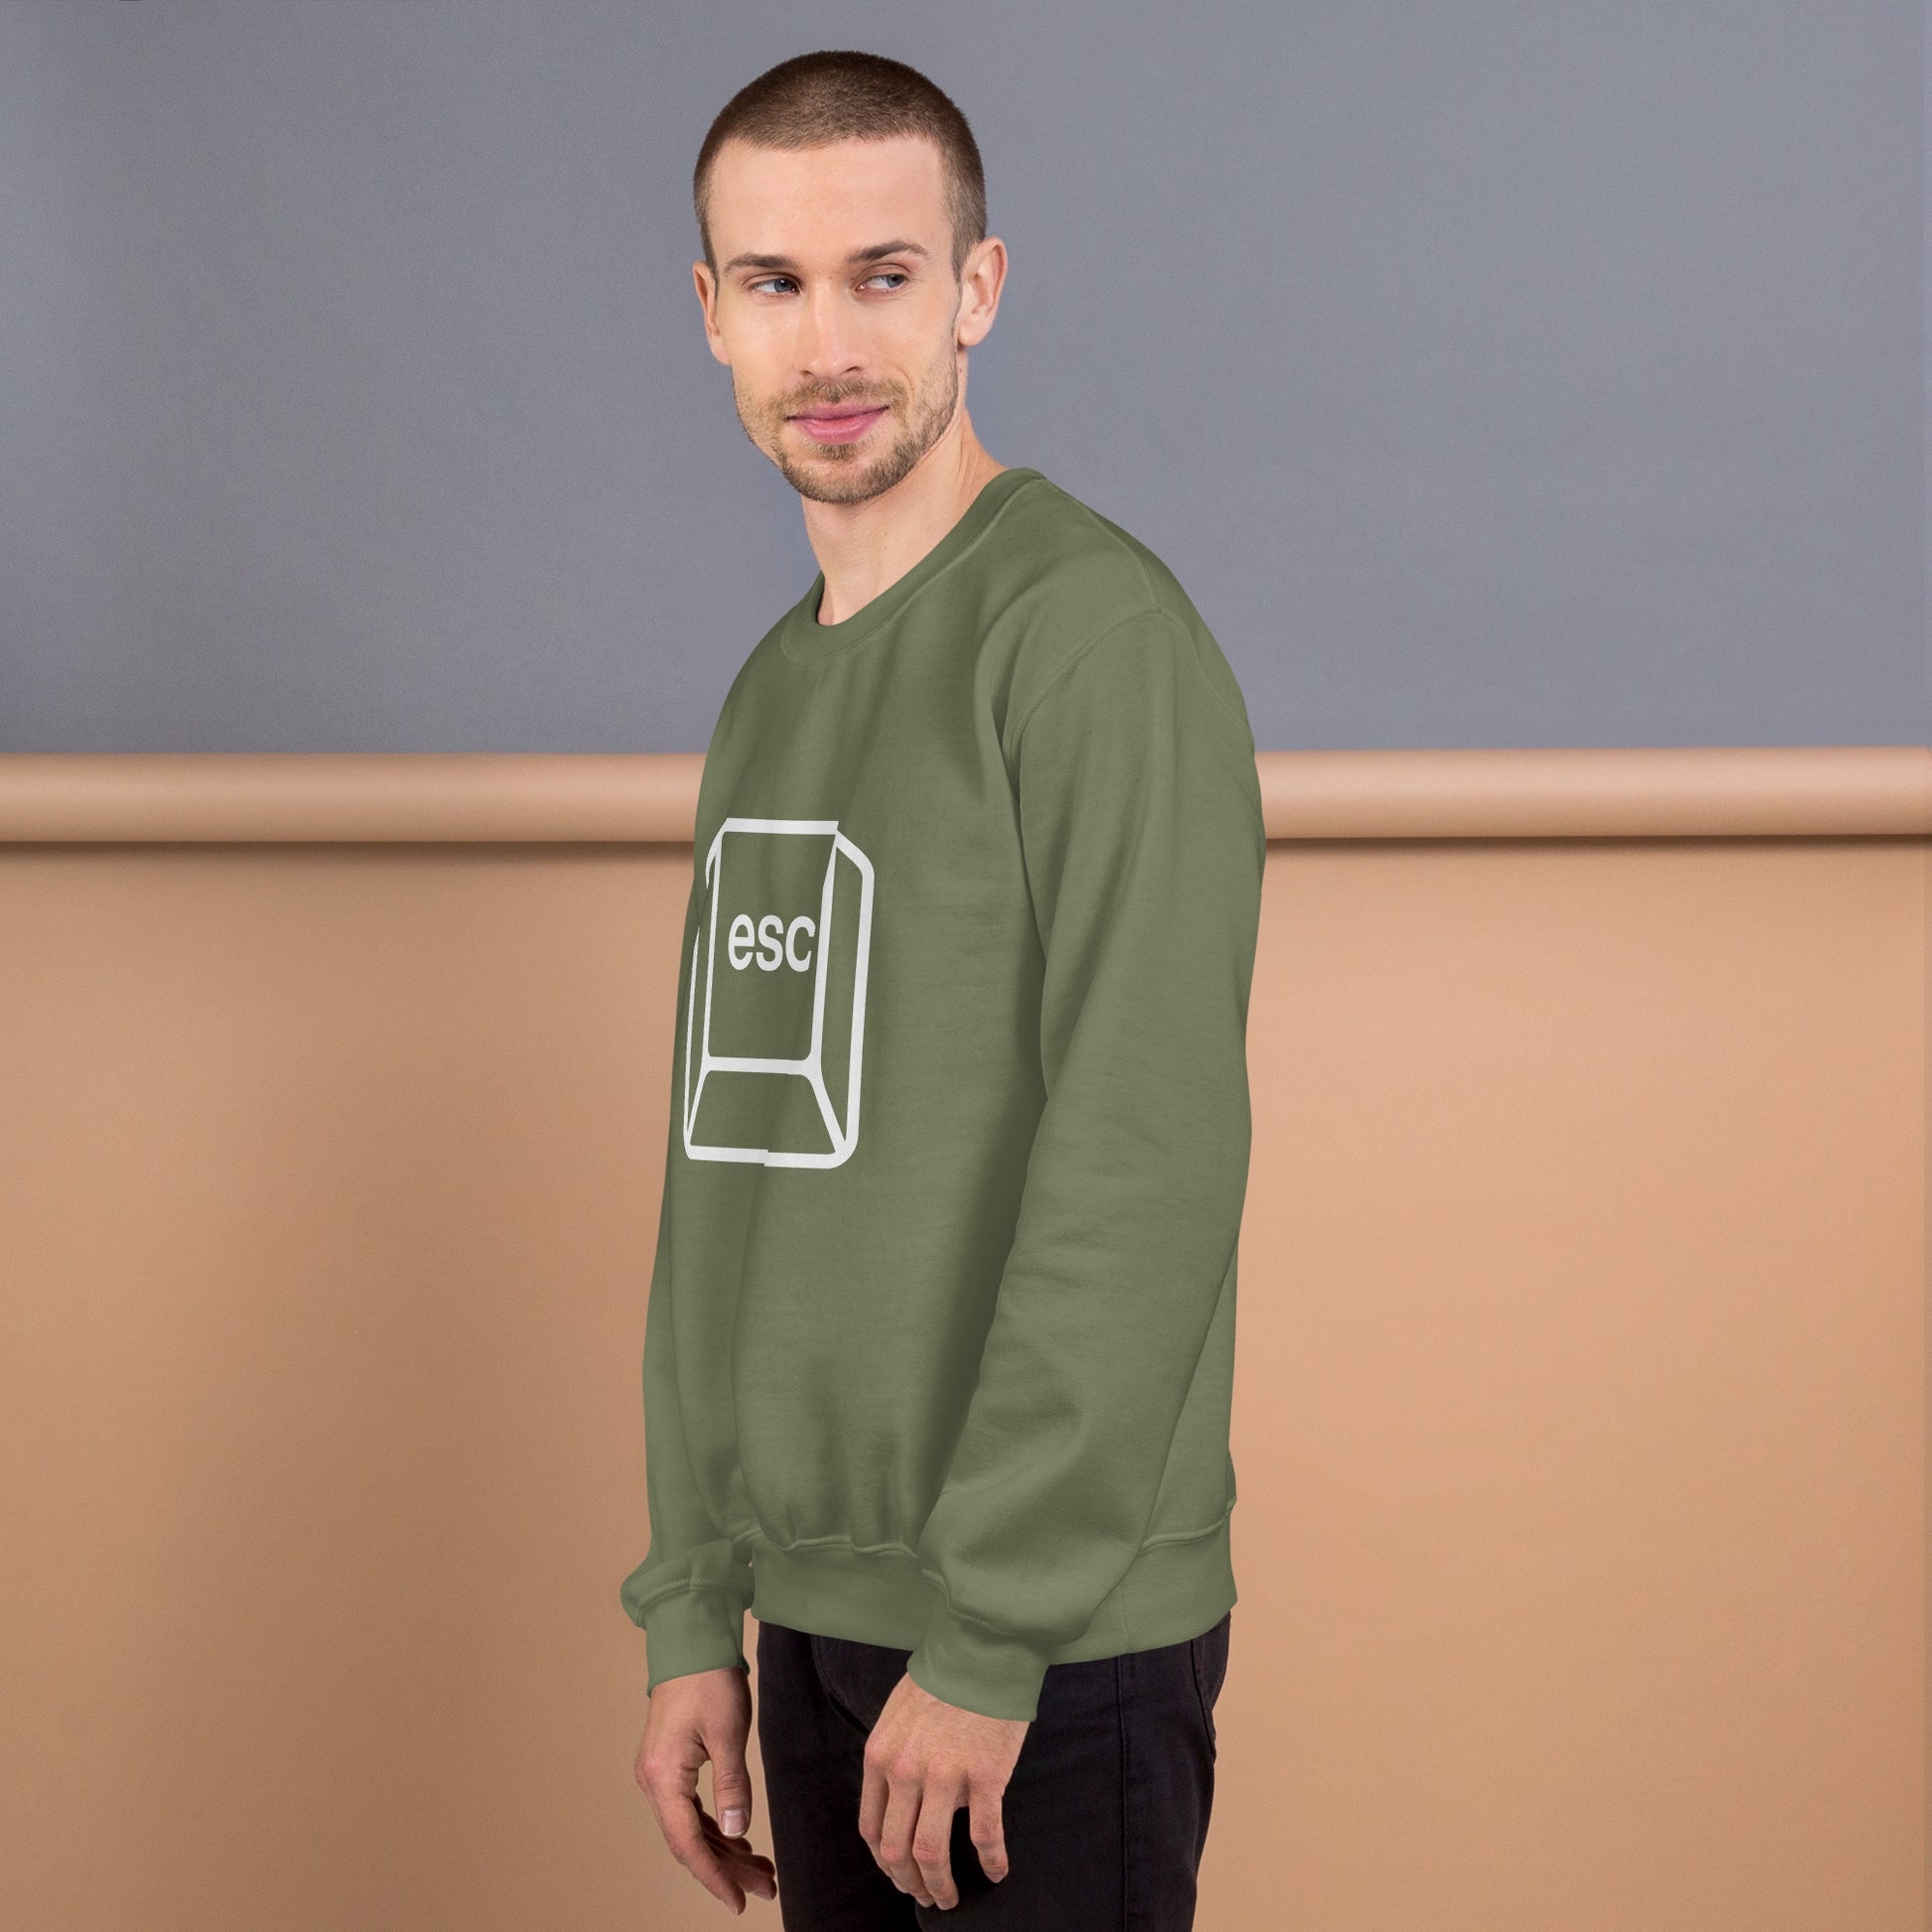 Man with military green sweatshirt with picture of esc key